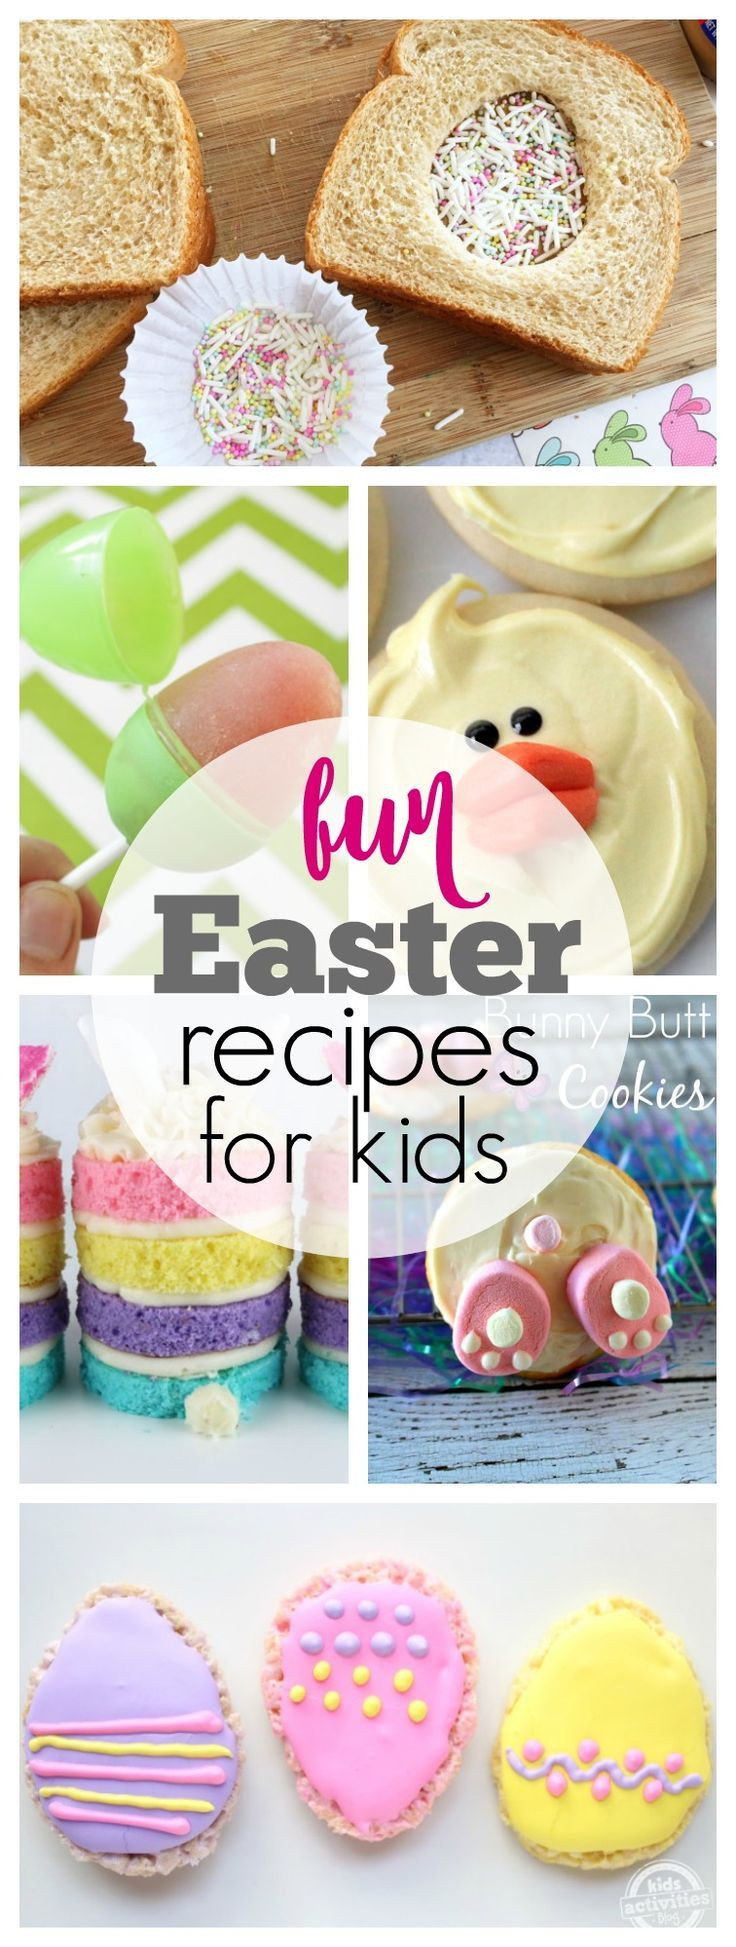 Easter Party Ideas For Work
 Fun Easter Recipes For Kids HOLIDAYS Easter